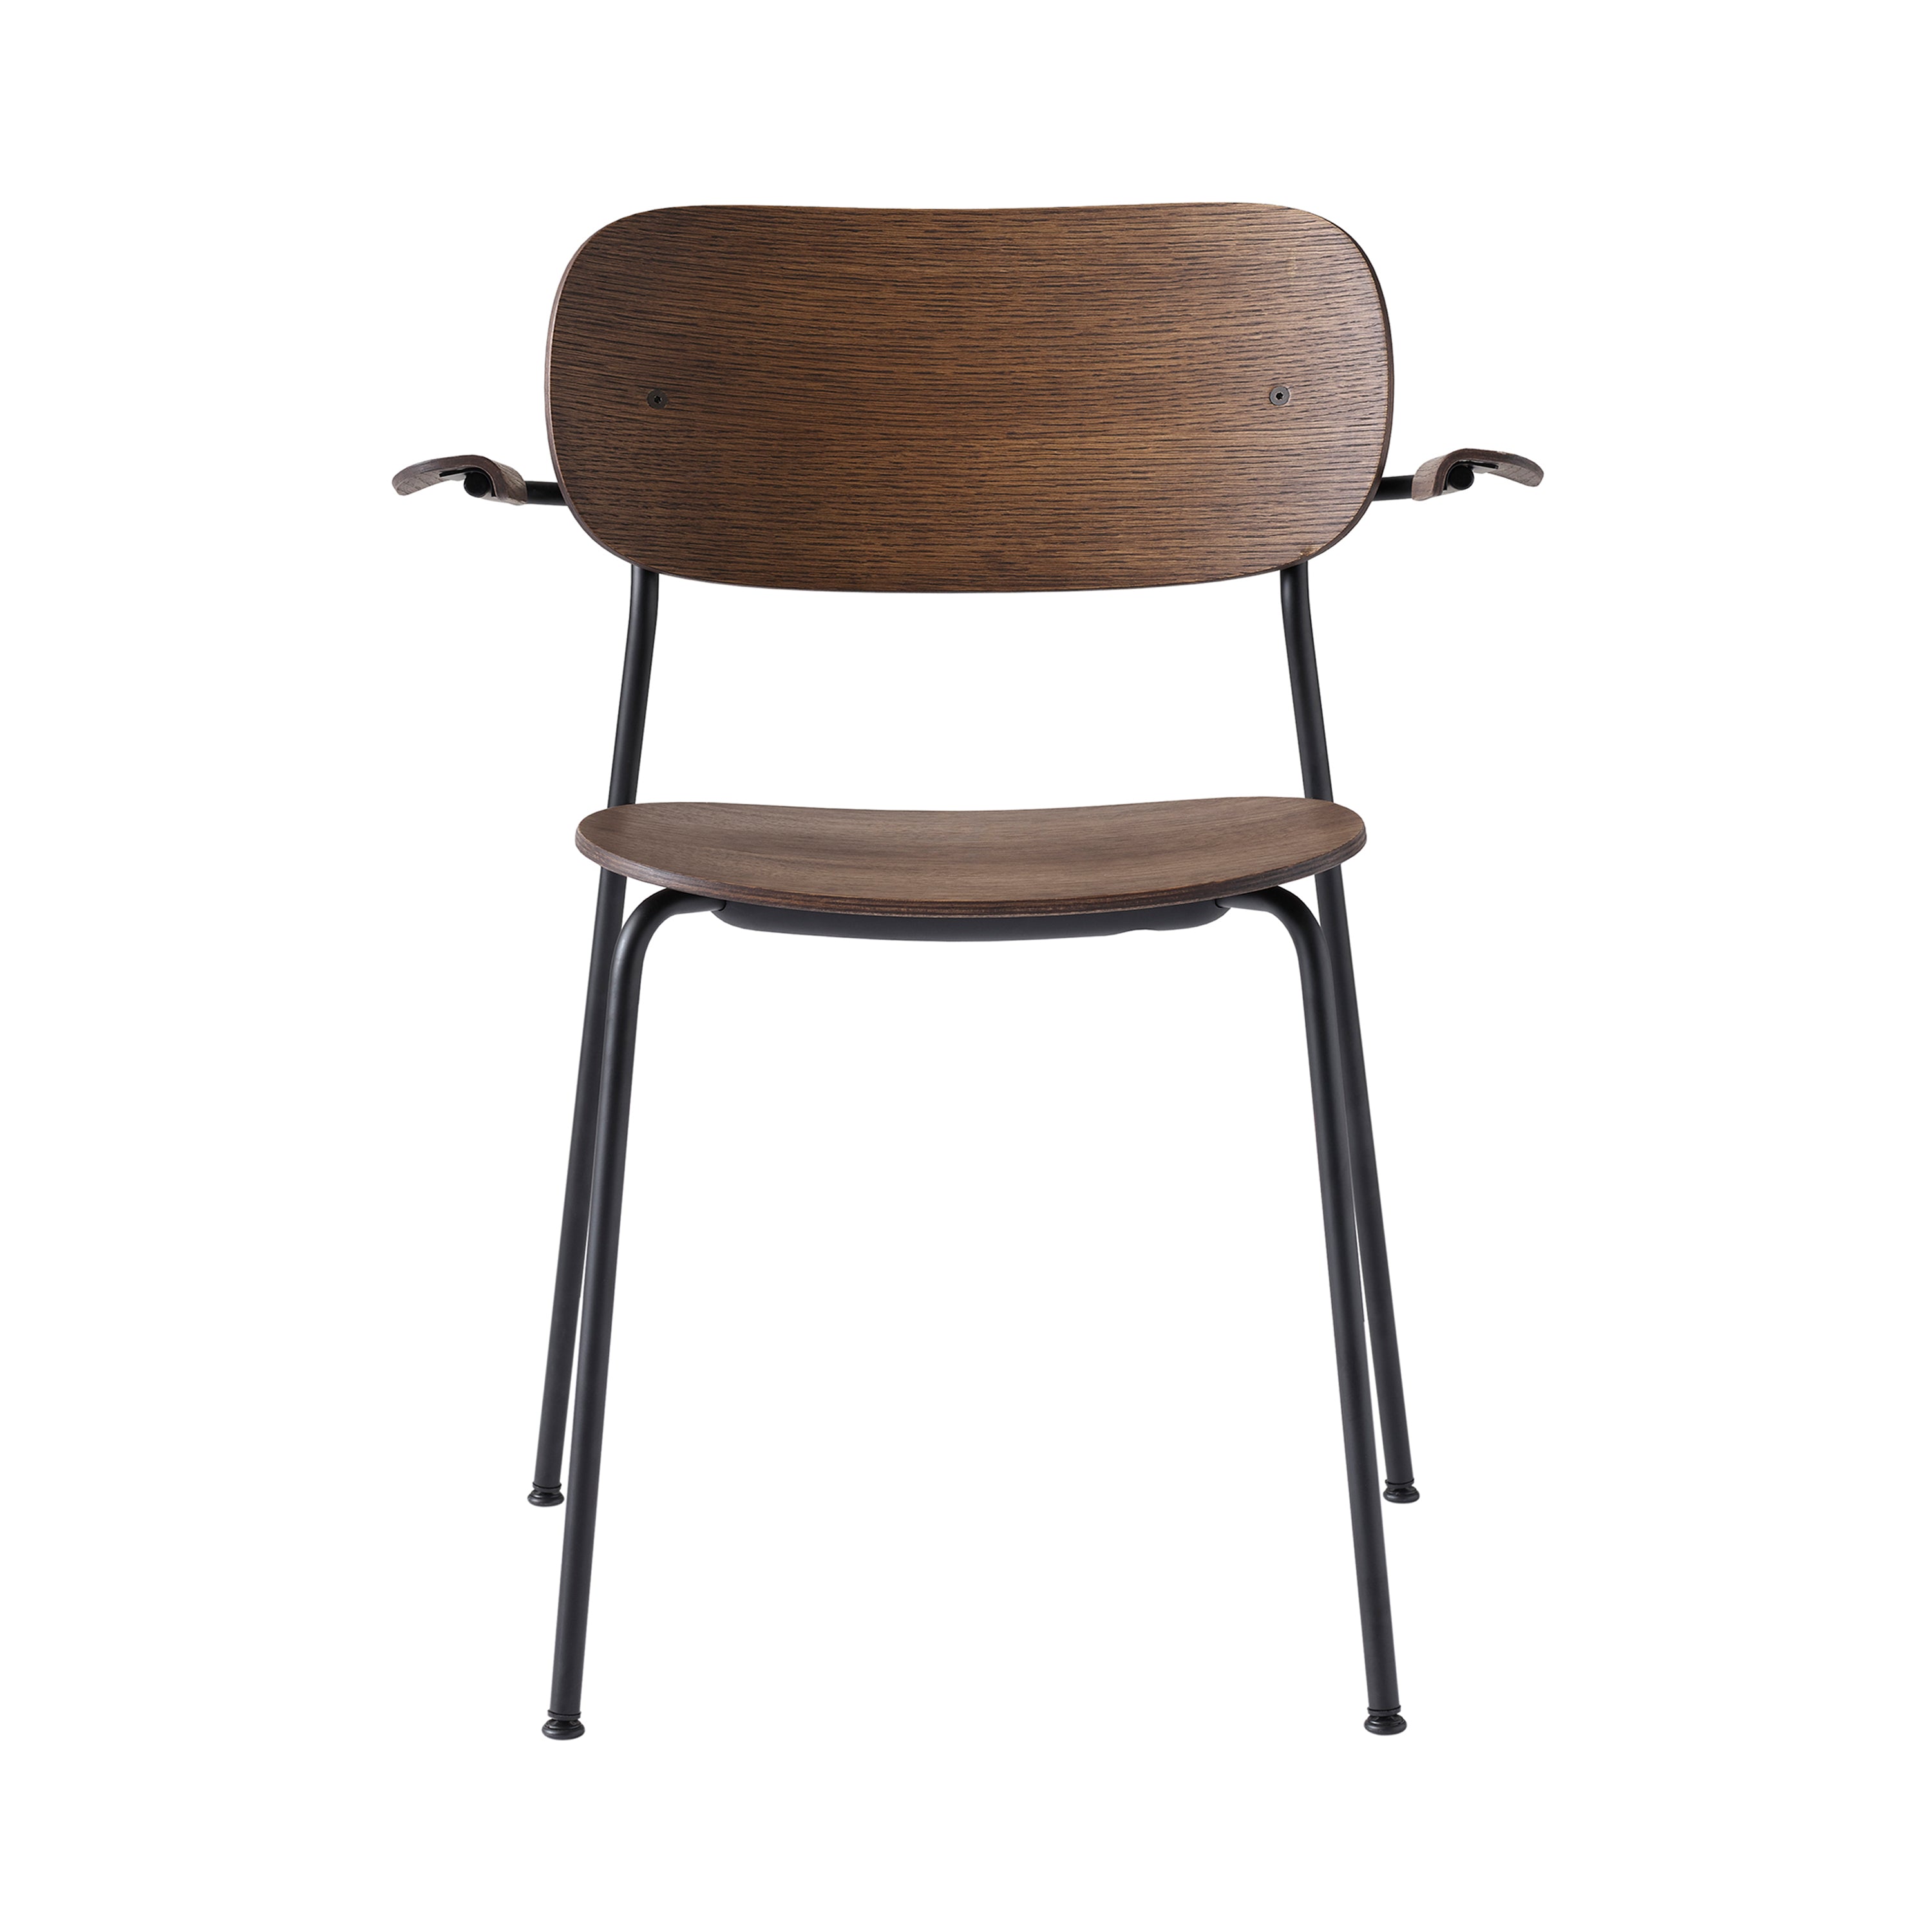 Co Chair with Armrests: Black + Dark Stained Oak